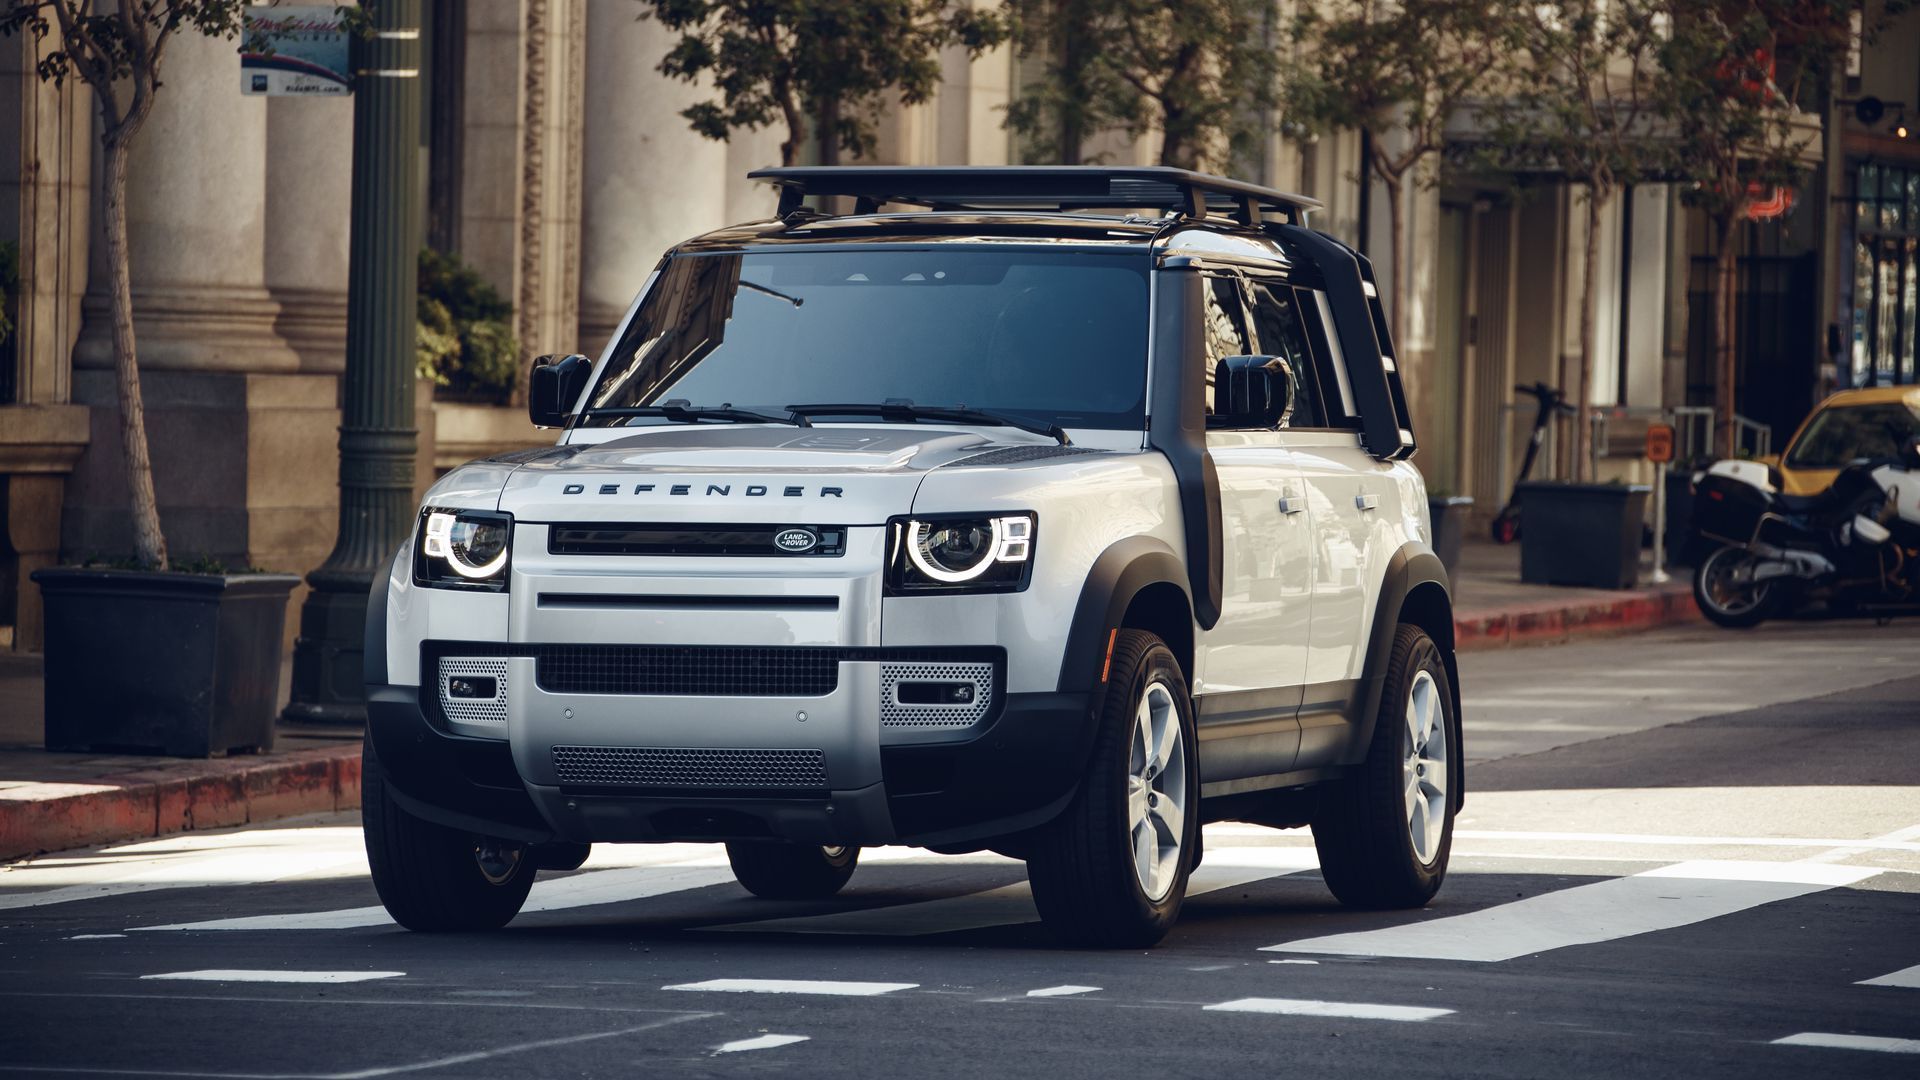 2020 Land Rover Defender. Photo: Nick Dimbleby/Land Rover